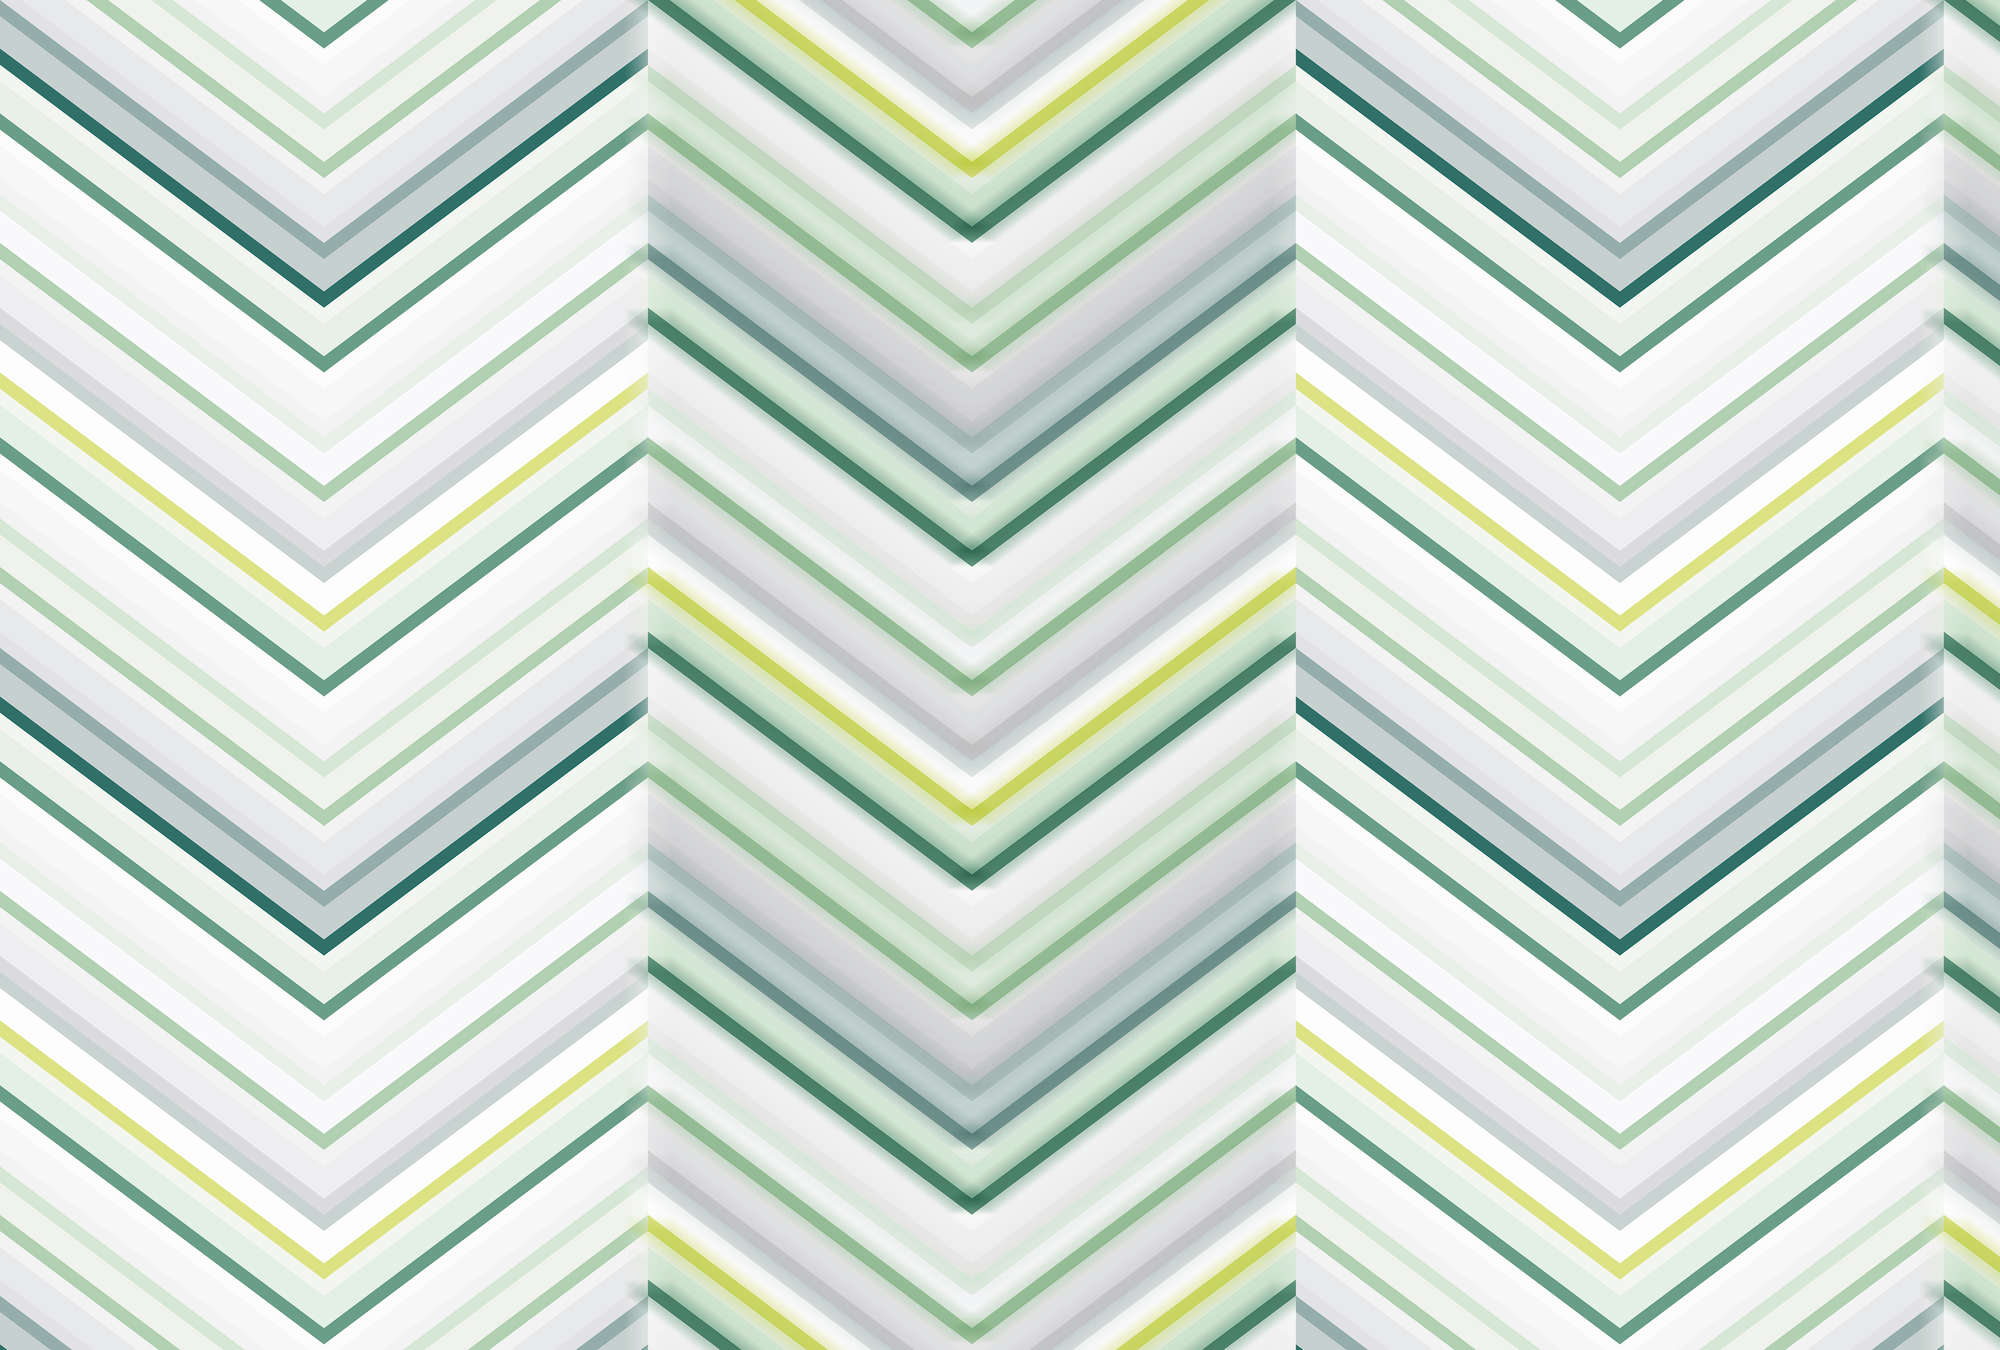             Colorful wall mural zigzag pattern & line design - grey, yellow, green
        